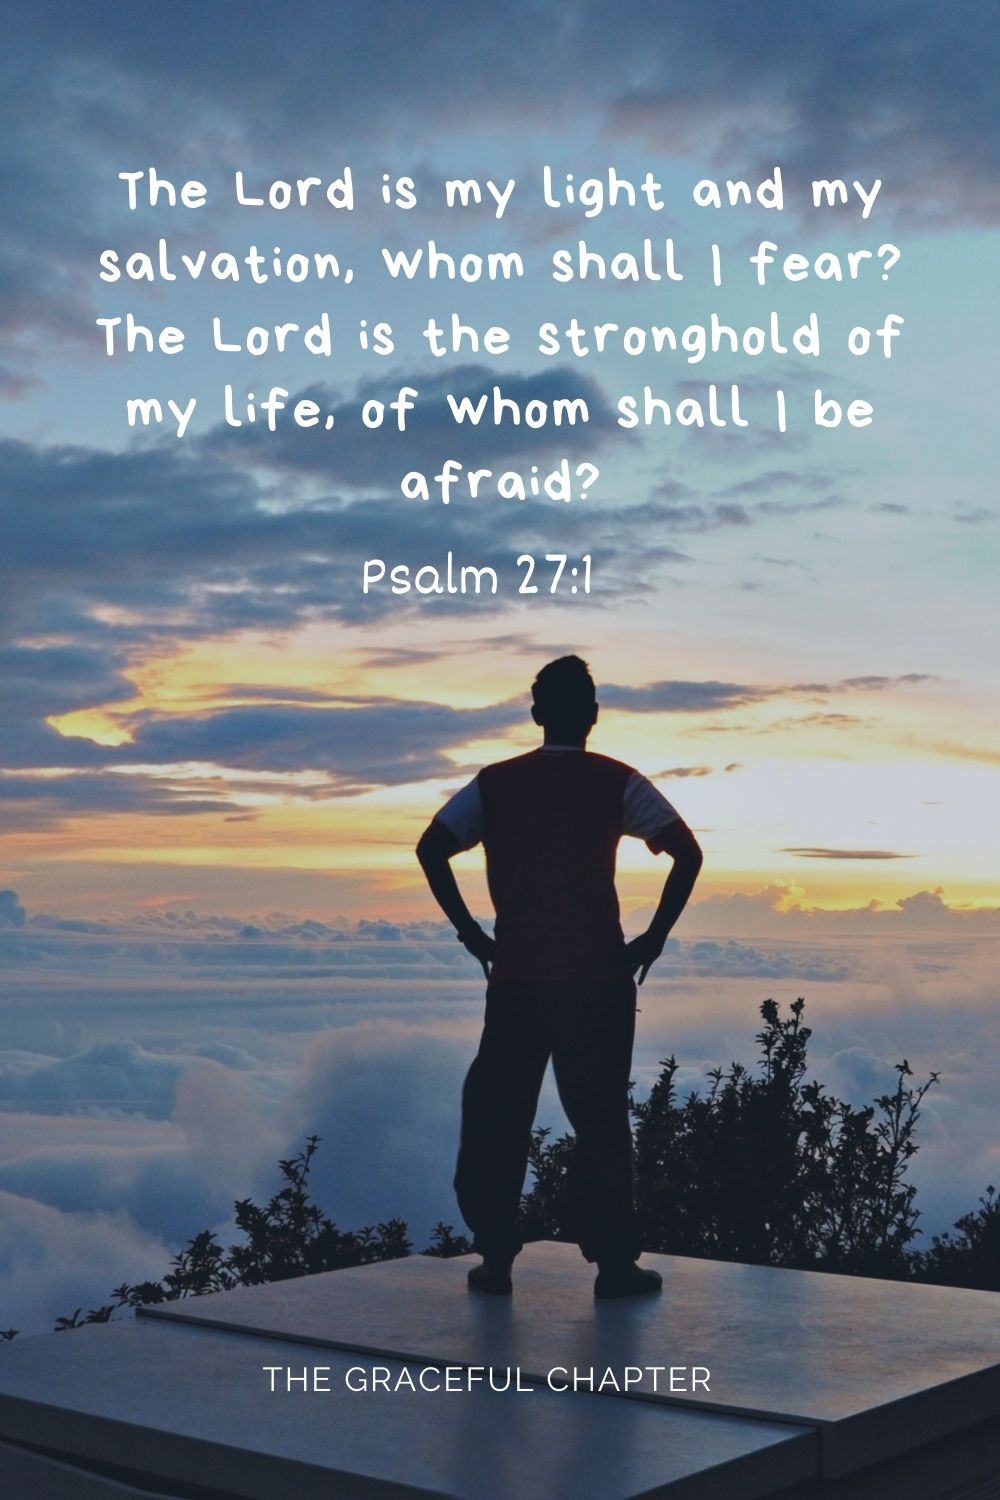 The Lord is my light and my salvation  whom shall I fear? The Lord is the stronghold of my life  of whom shall I be afraidThe Lord is my light and my salvation  whom shall I fear? The Lord is the stronghold of my life  of whom shall I be afraid? Psalm 27:1